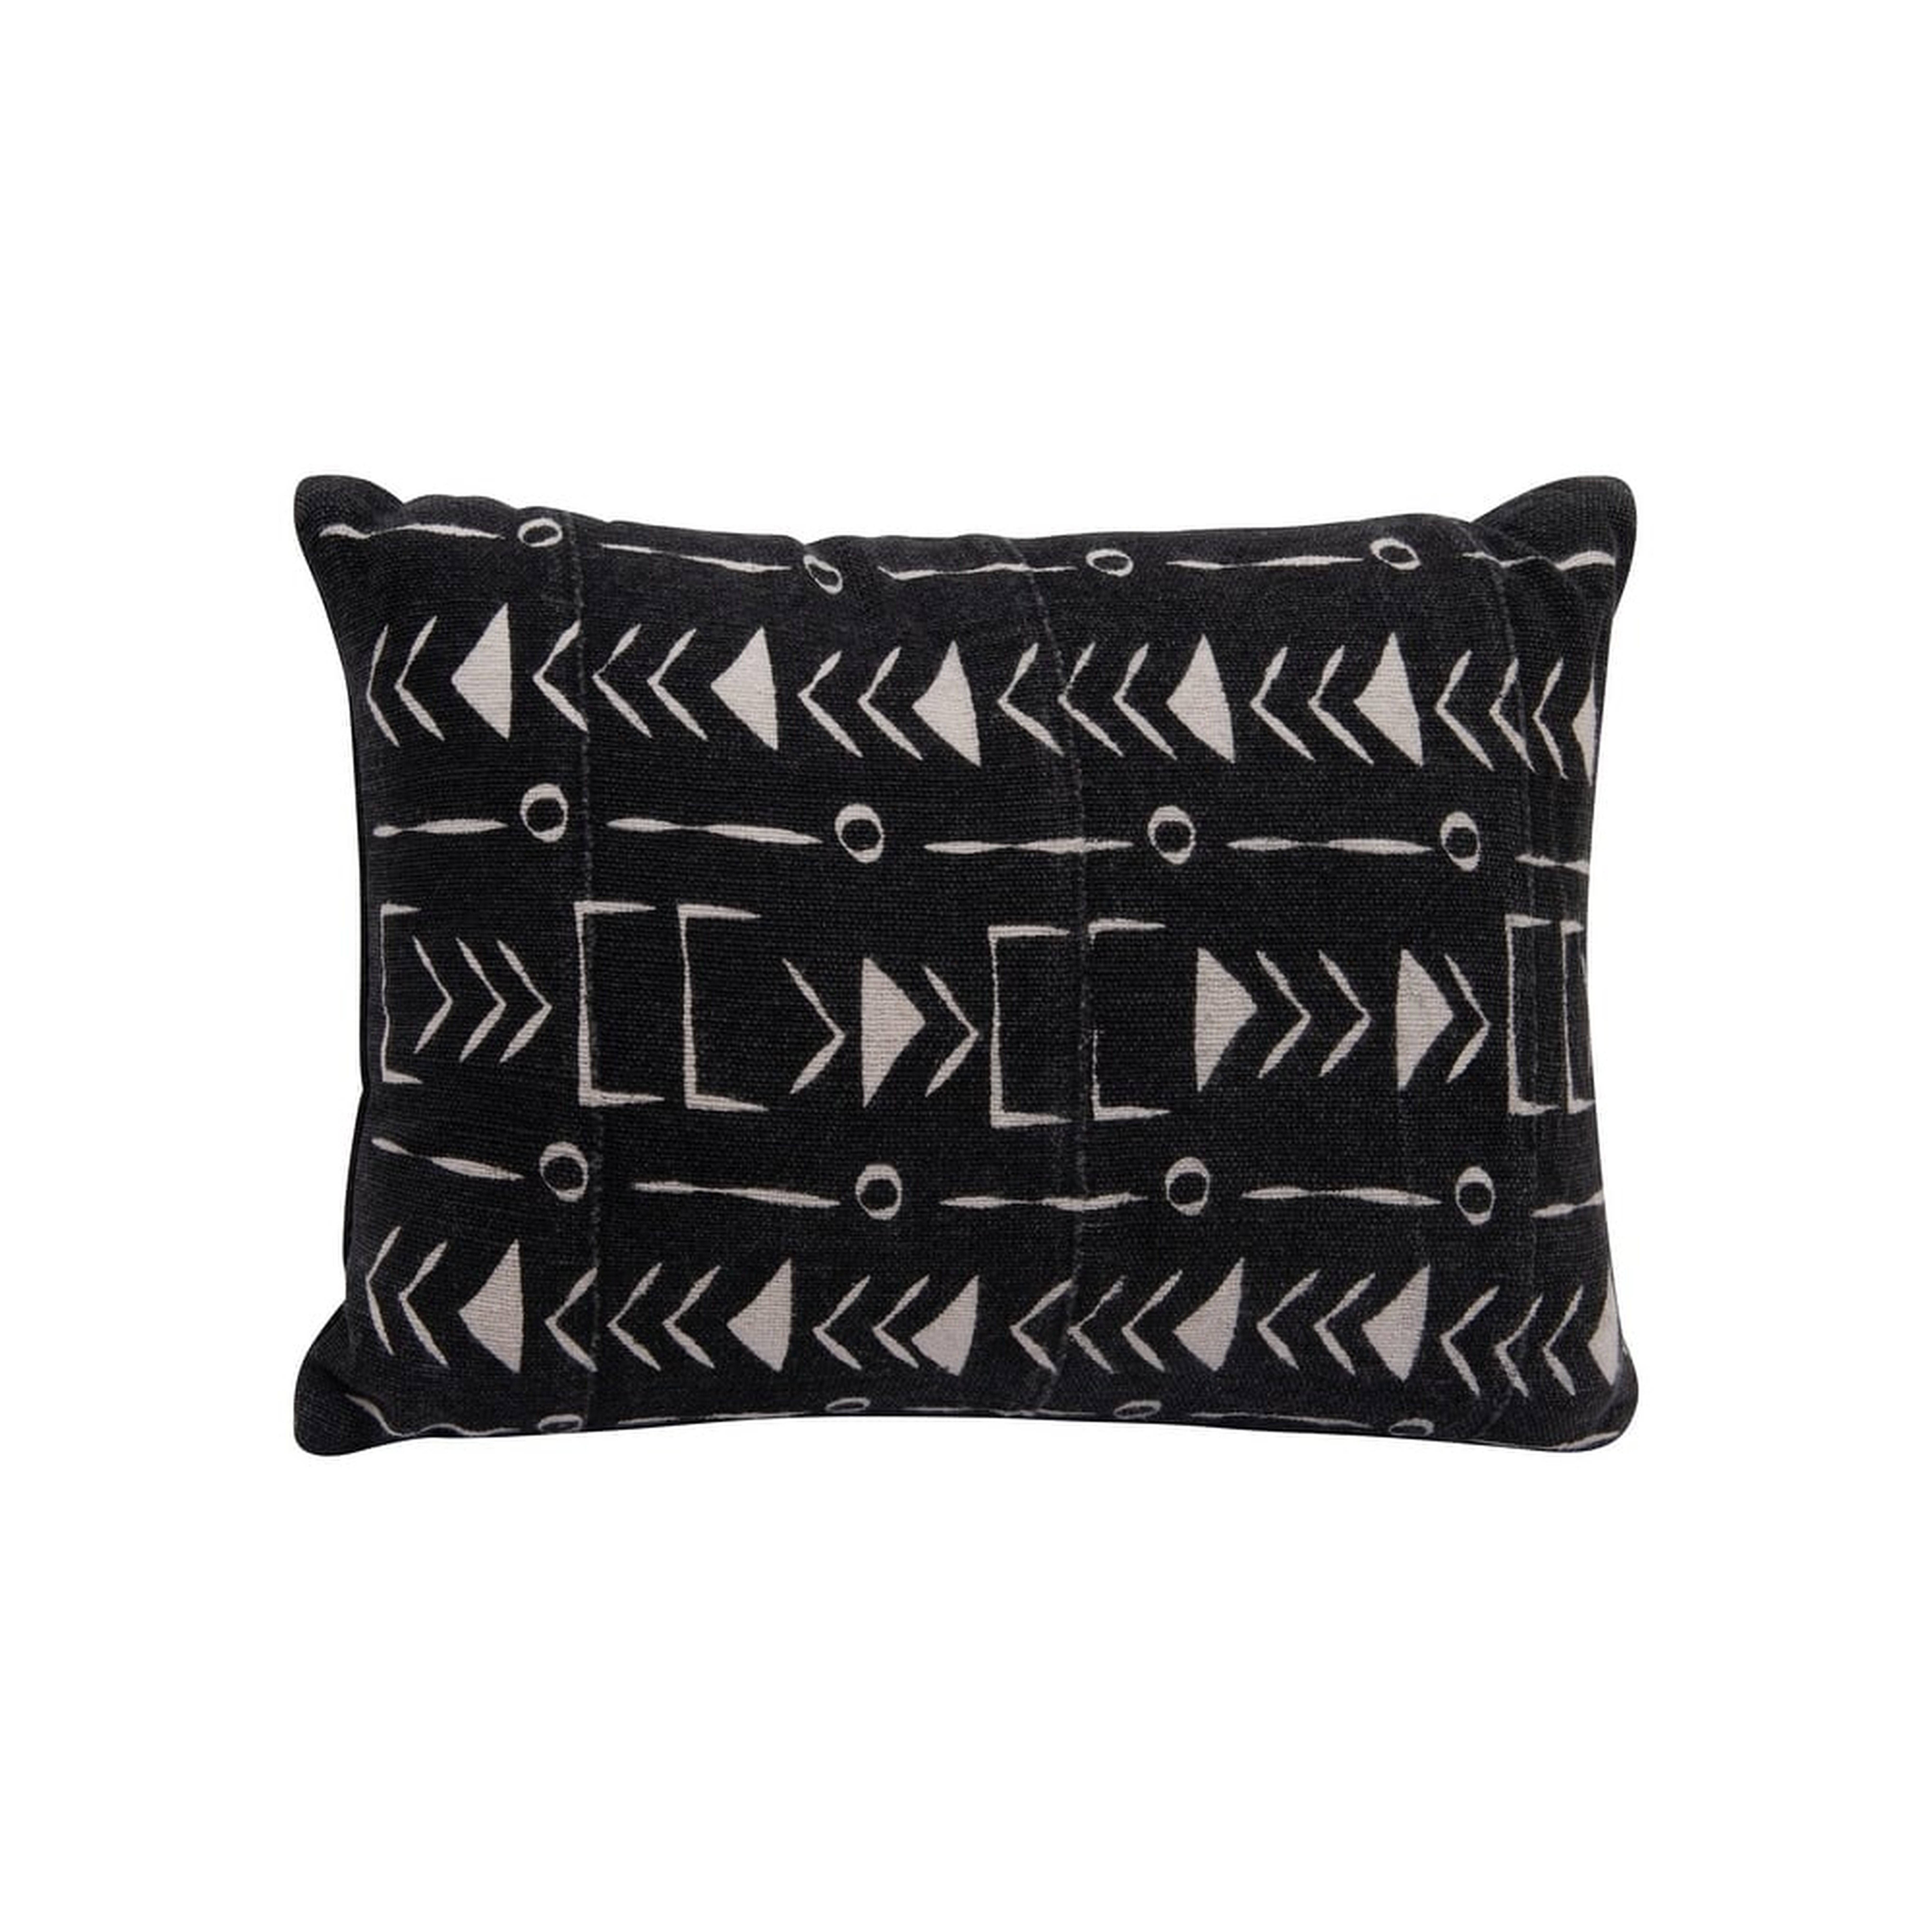 African Mudcloth Patterned Cotton Pillows, Black & White, Set of 2 - Nomad Home